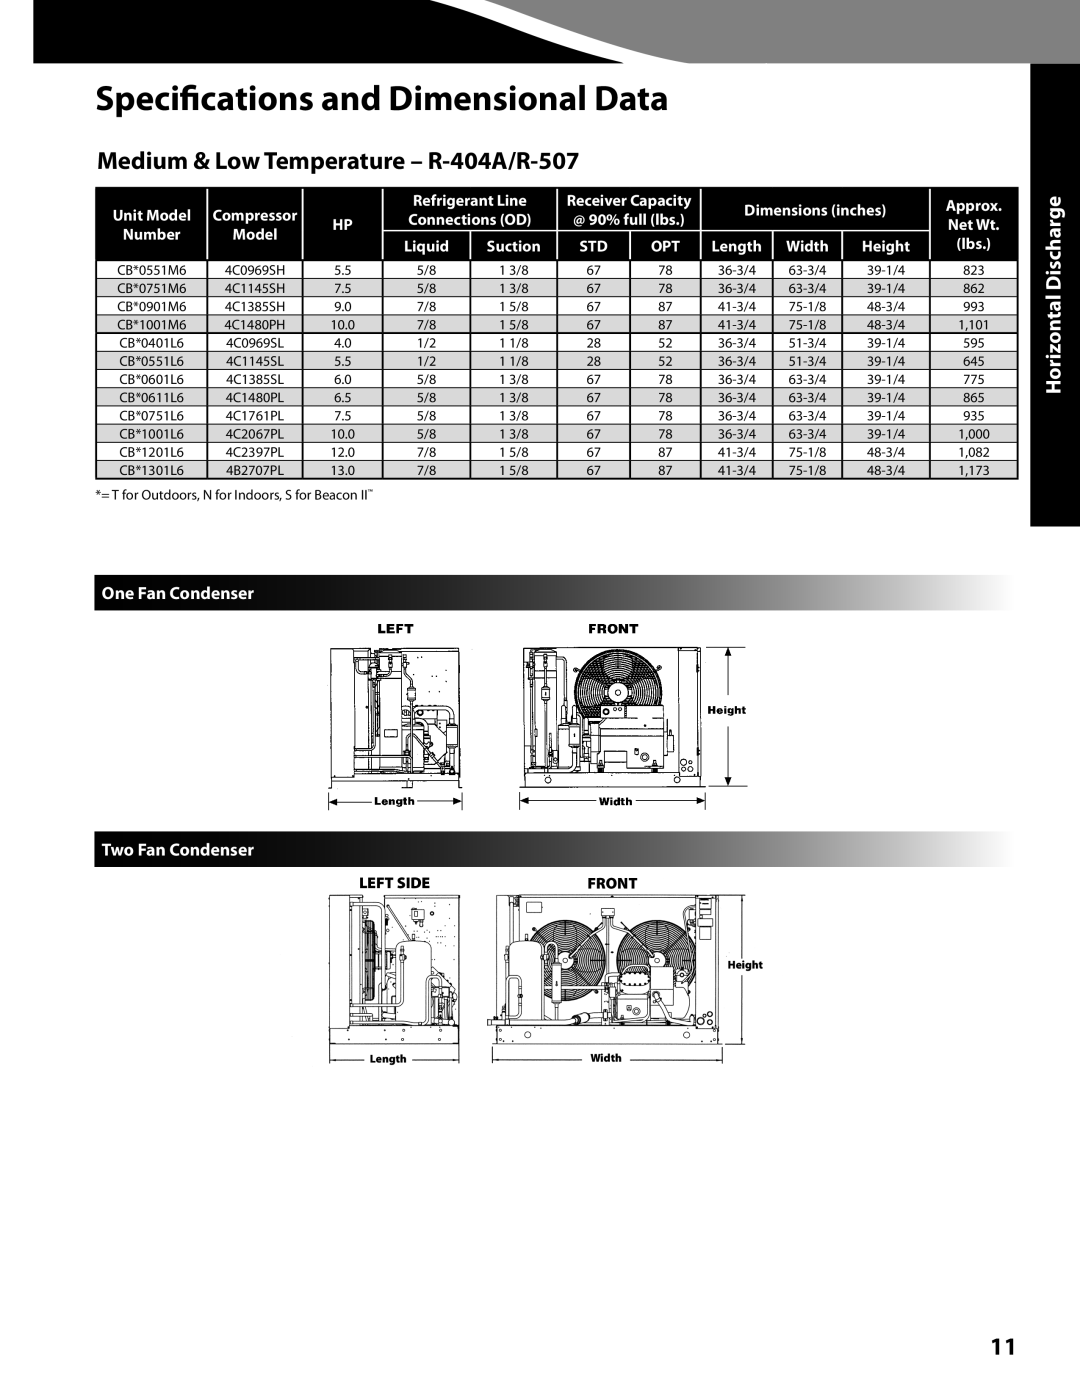 Heatcraft Refrigeration Products CC-CUBZTB Specifications and Dimensional Data, Medium & Low Temperature - R-404A/R-507 